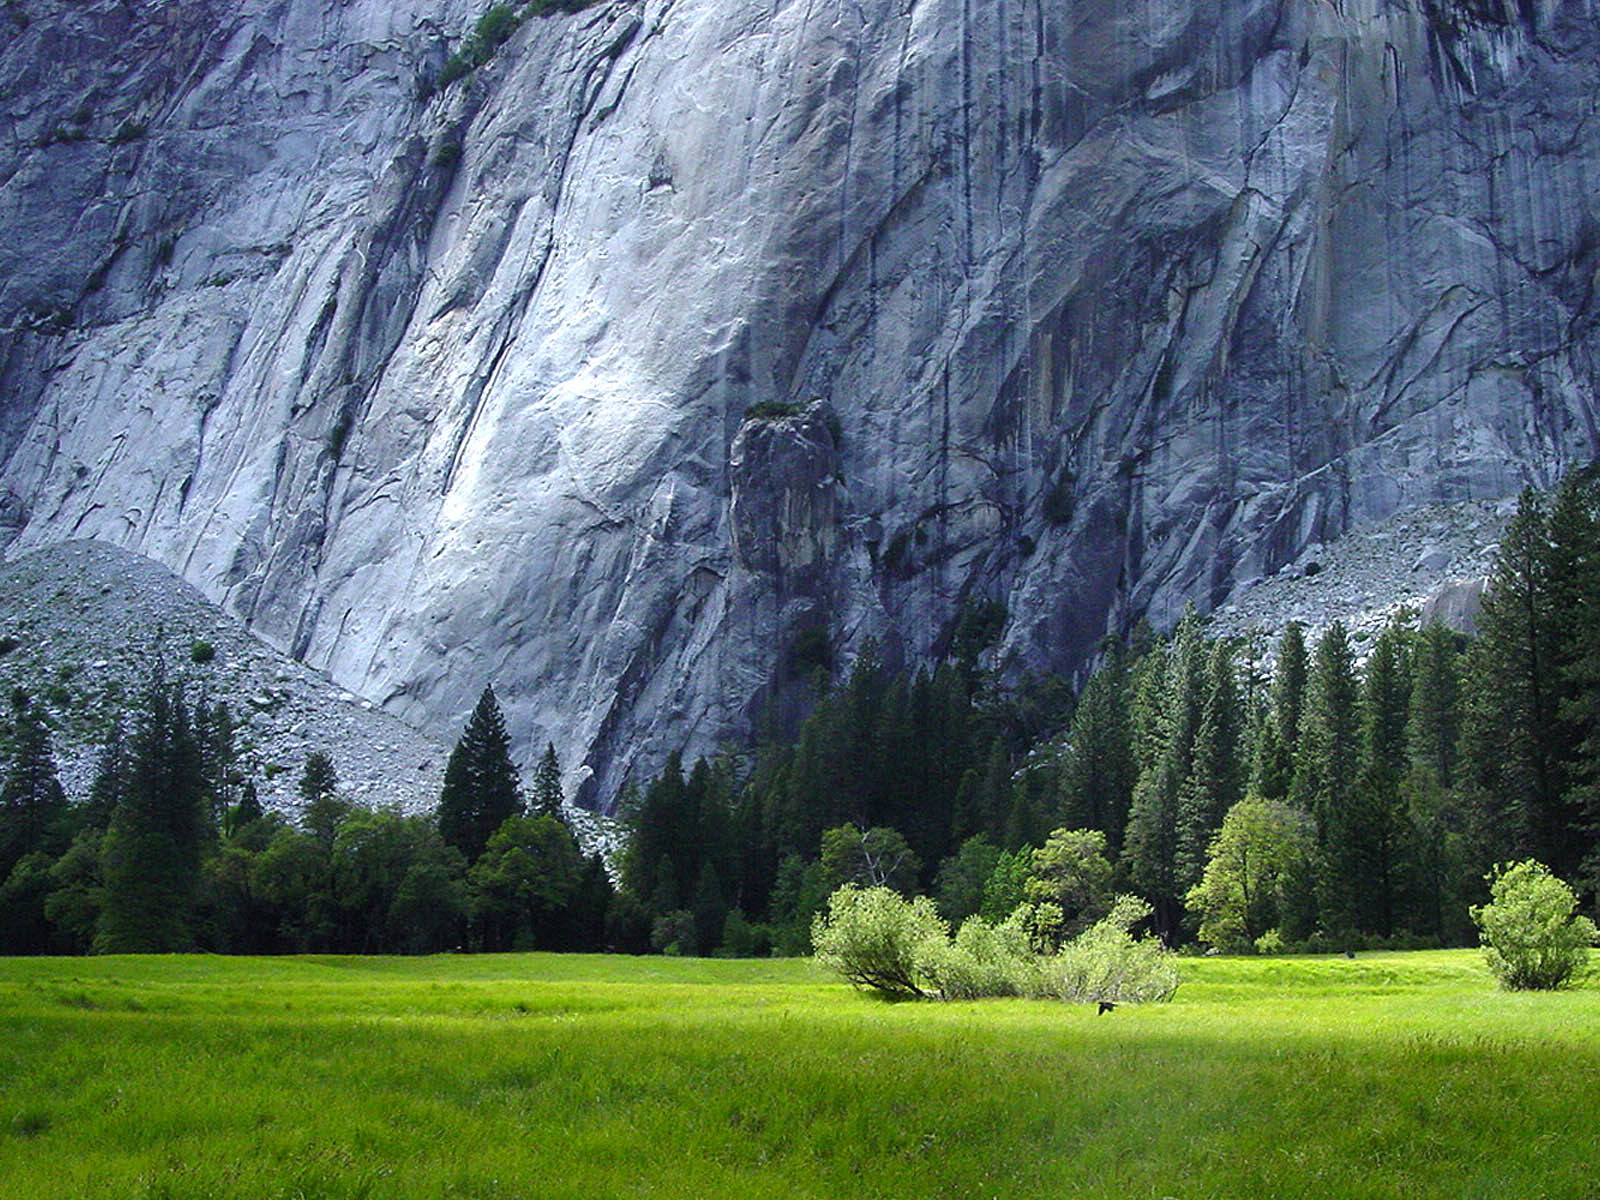 Rock Face Yosemite Best Background Full HD1920x1080p, 1280x720p, – HD Wallpapers Backgrounds Desktop, iphone & Android Free Download